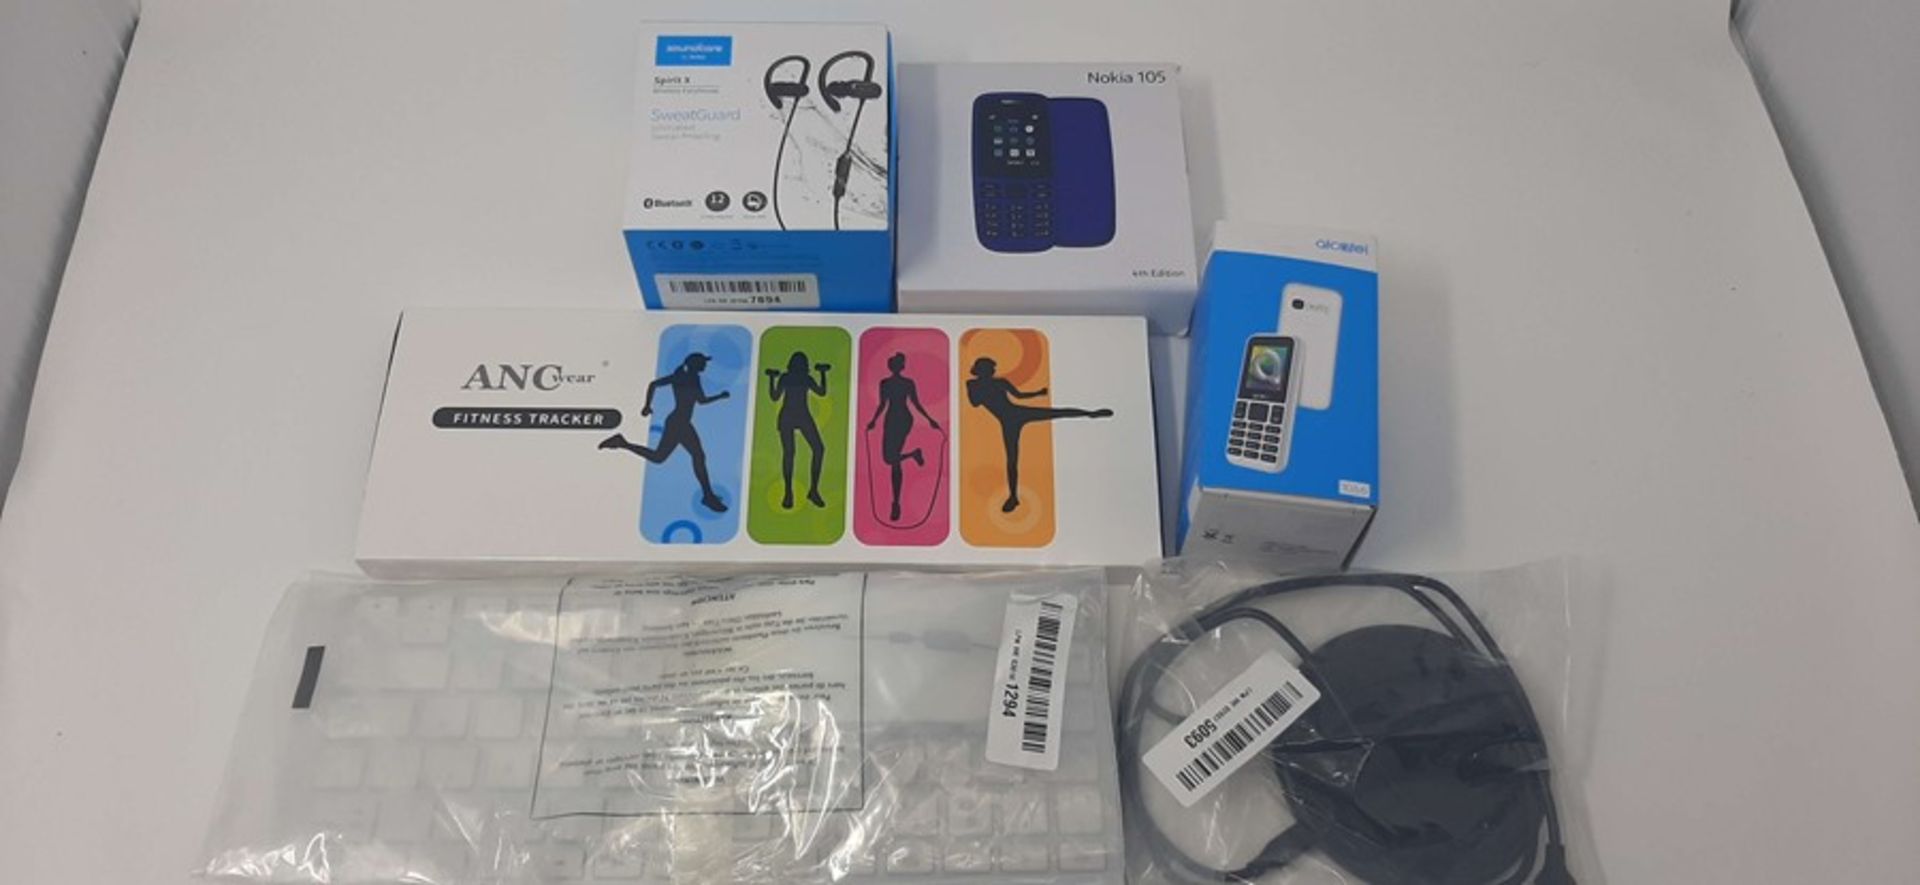 COMBINED RRP £89.00 LOT TO CONTAIN 6 ASSORTED Tech Products: Wireless, ANCwear, Anker, Nokia, B